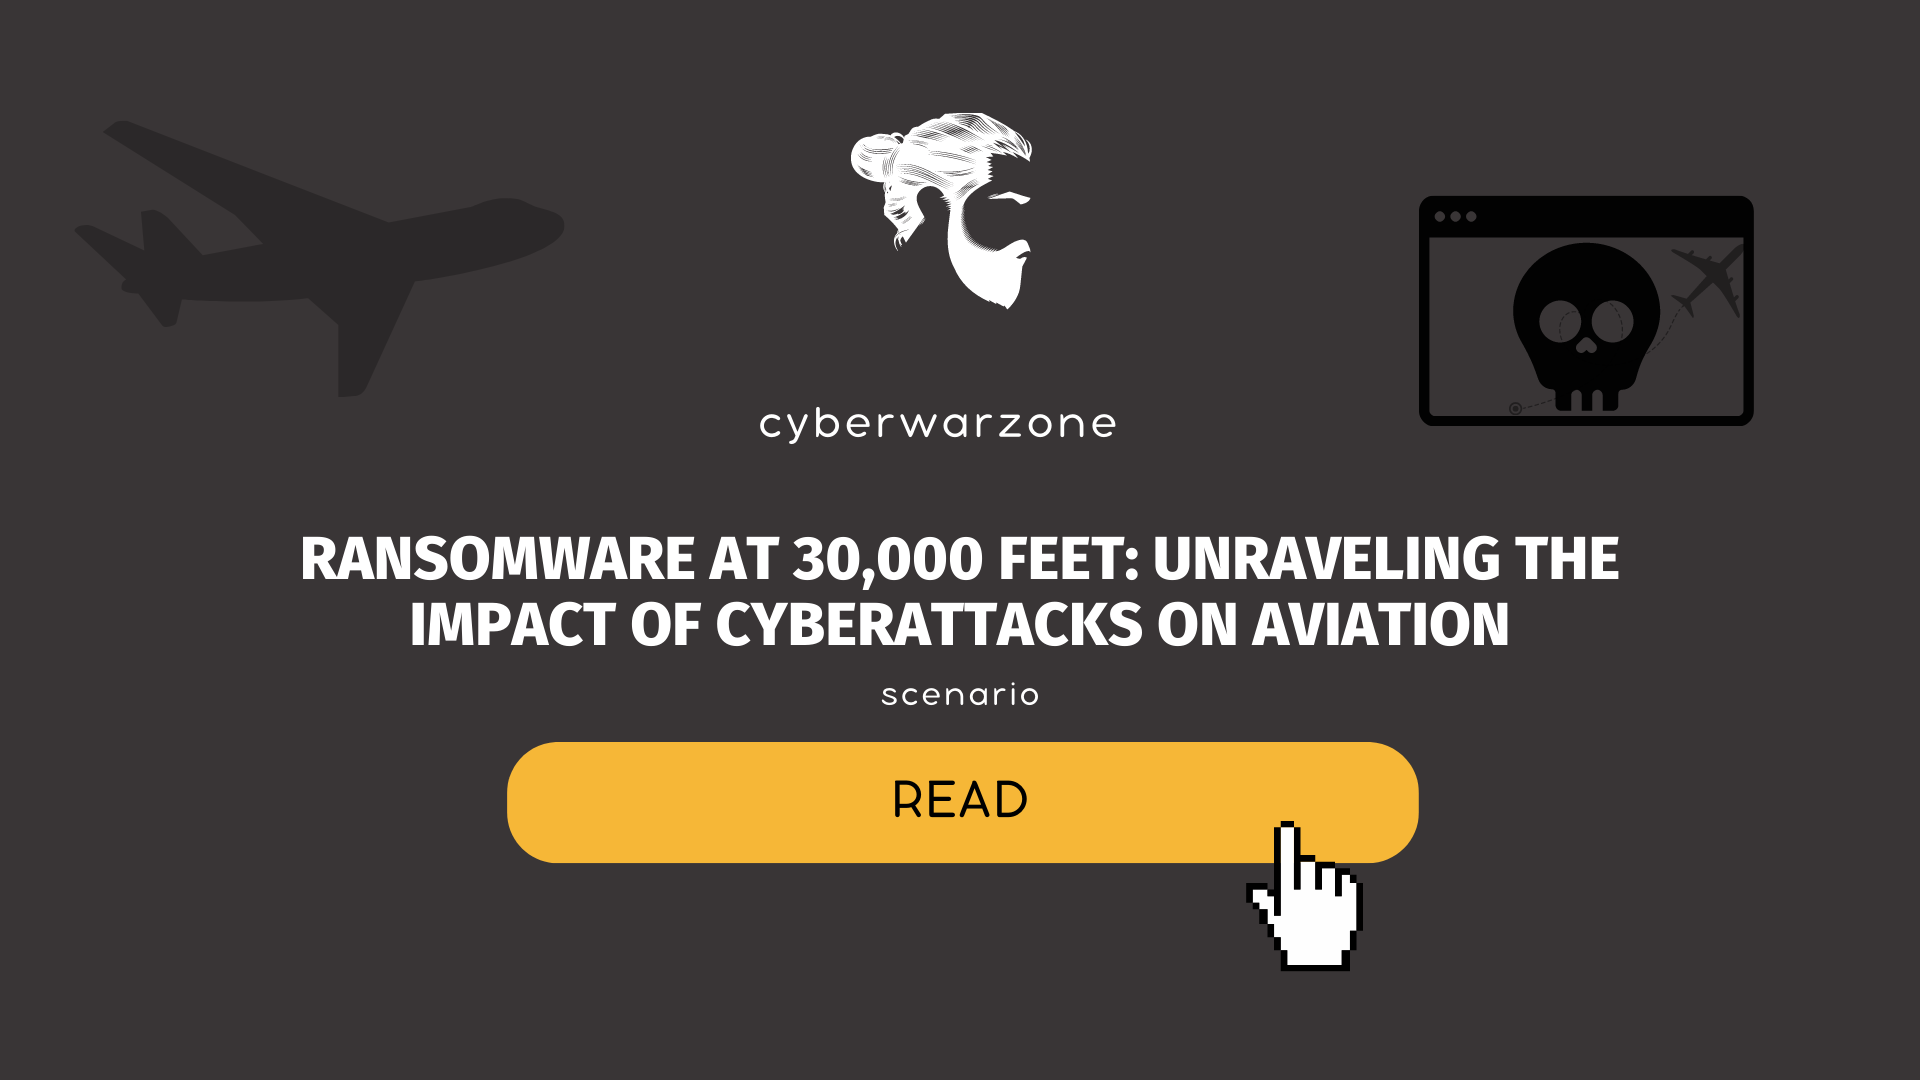 Ransomware at 30,000 Feet: Unraveling the Impact of Cyberattacks on Aviation